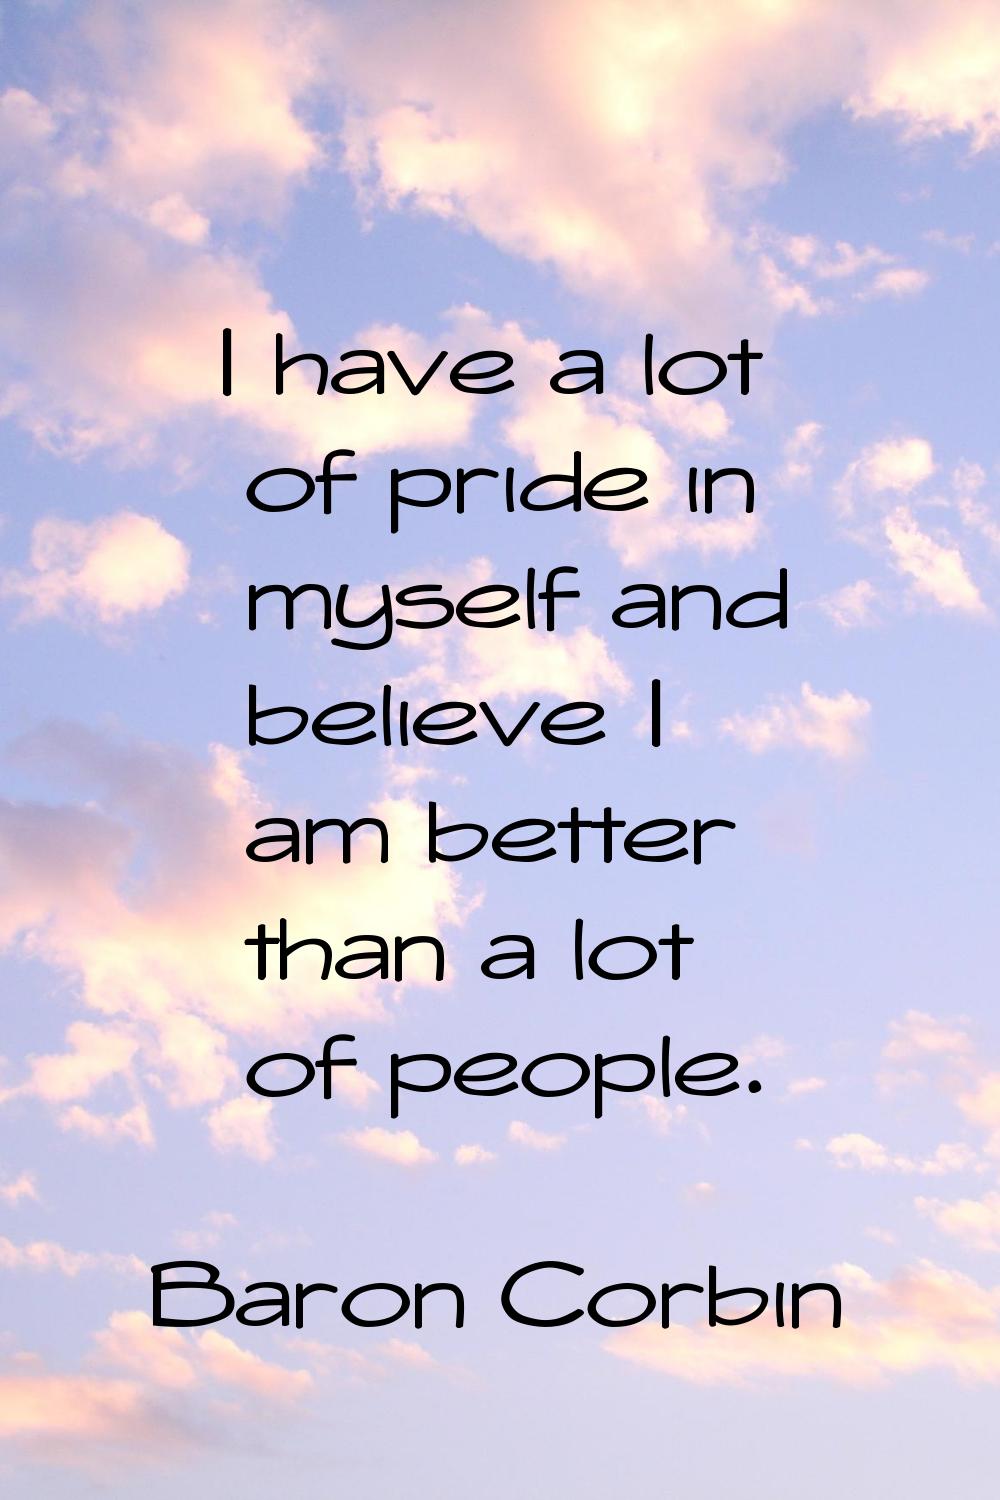 I have a lot of pride in myself and believe I am better than a lot of people.